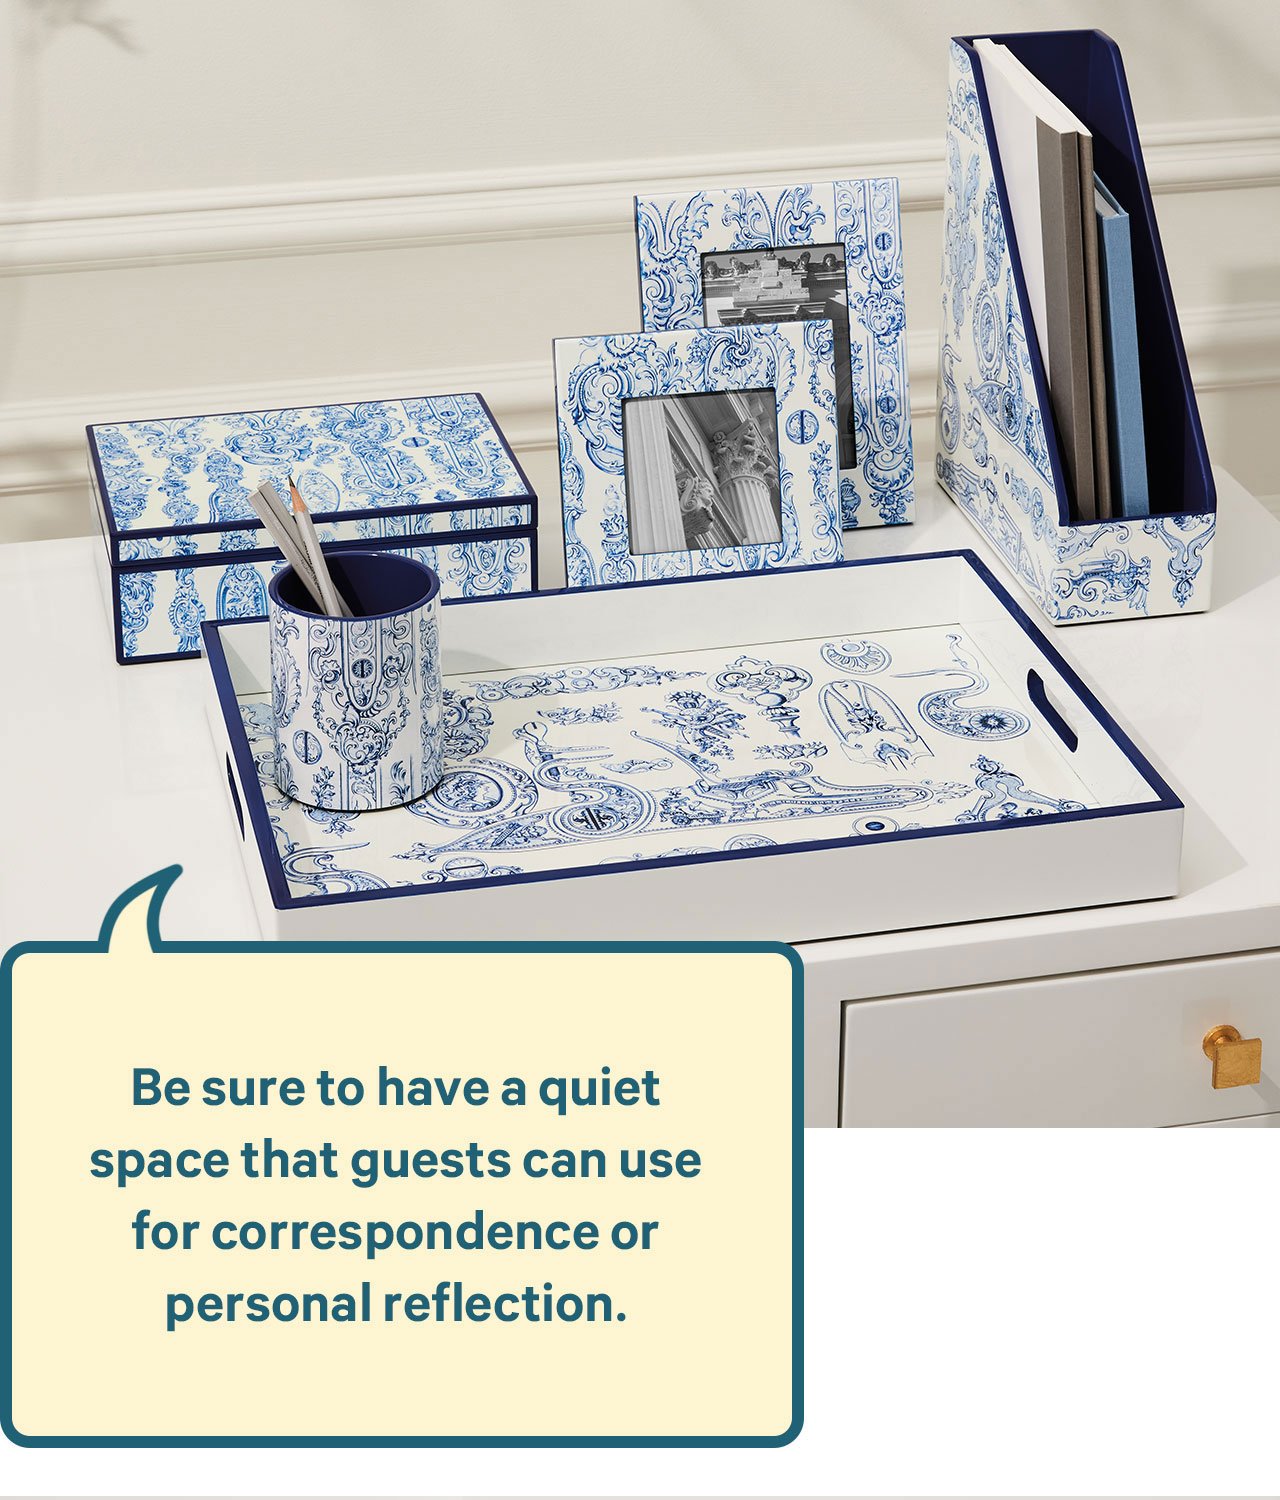 Be sure to have a quiet space that guests can use for correspondence or personal reflection.